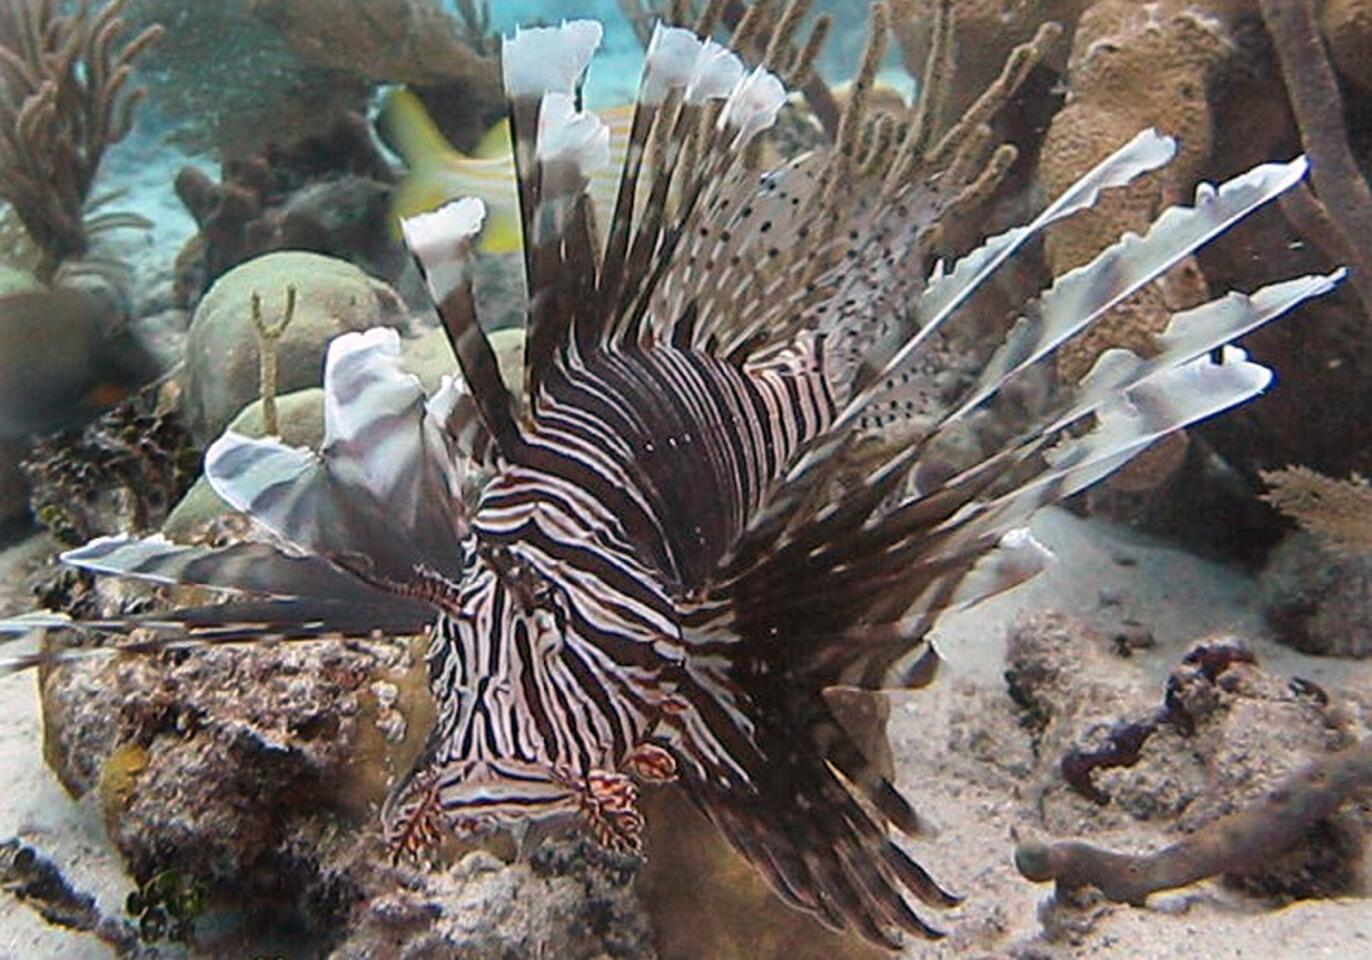 Lionfish are are invading coral reefs and devouring native fish throughout the Caribbean. Eradication of the nonnative species seems impossible, but scientists now say that you don't have to remove every last lionfish from a reef in order for native fish populations to return.